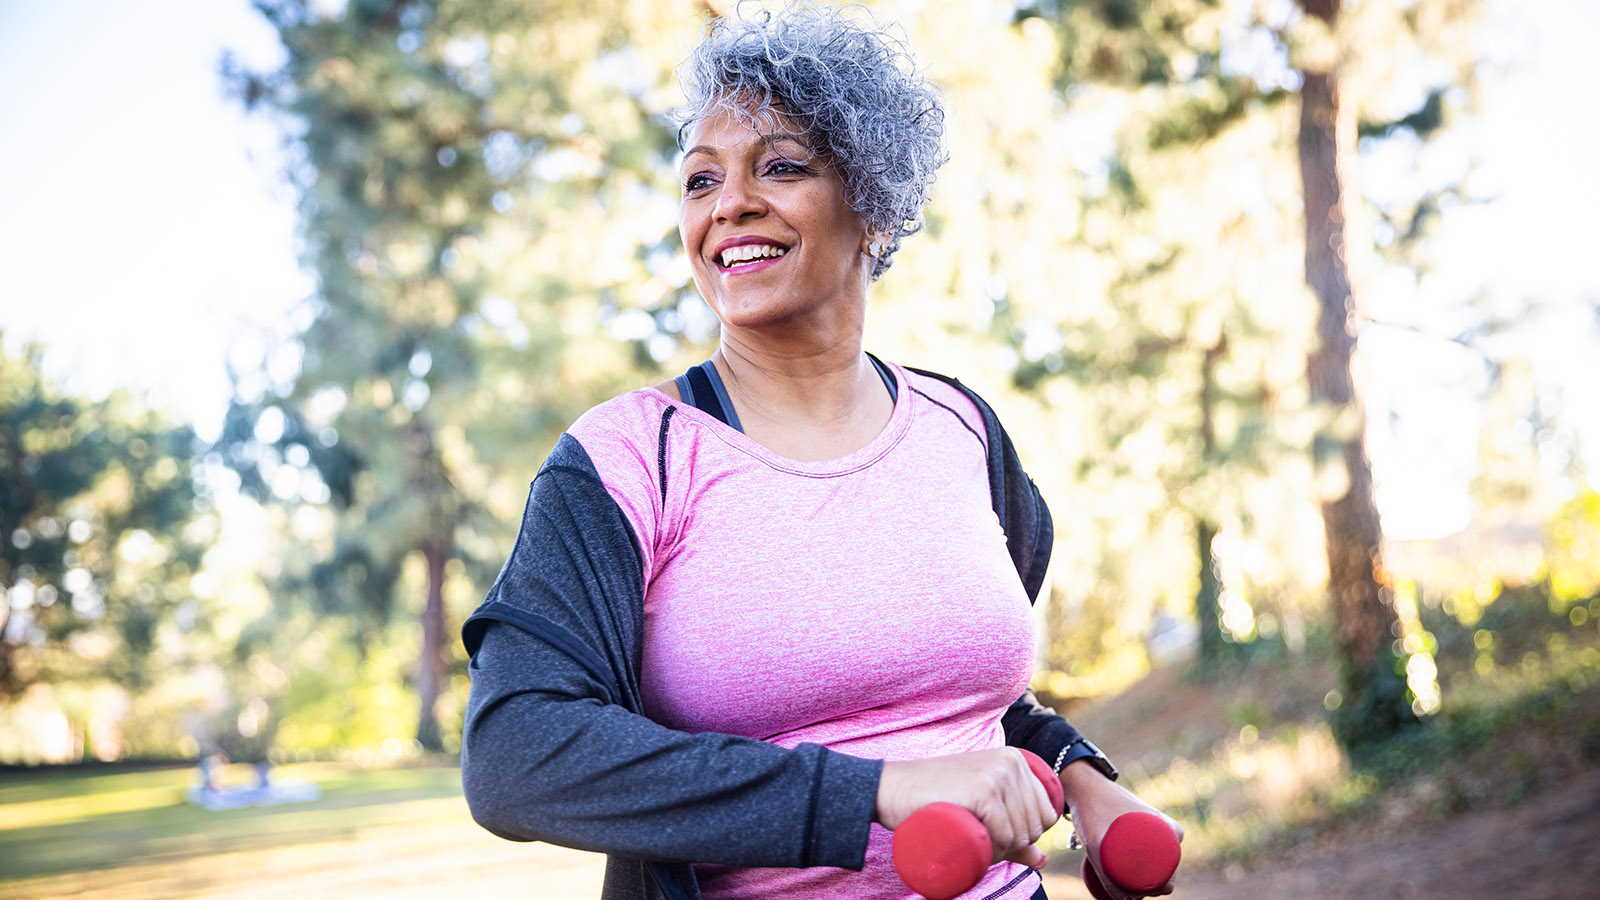 Middle aged woman holding hand weights and enjoying exercising outdoors